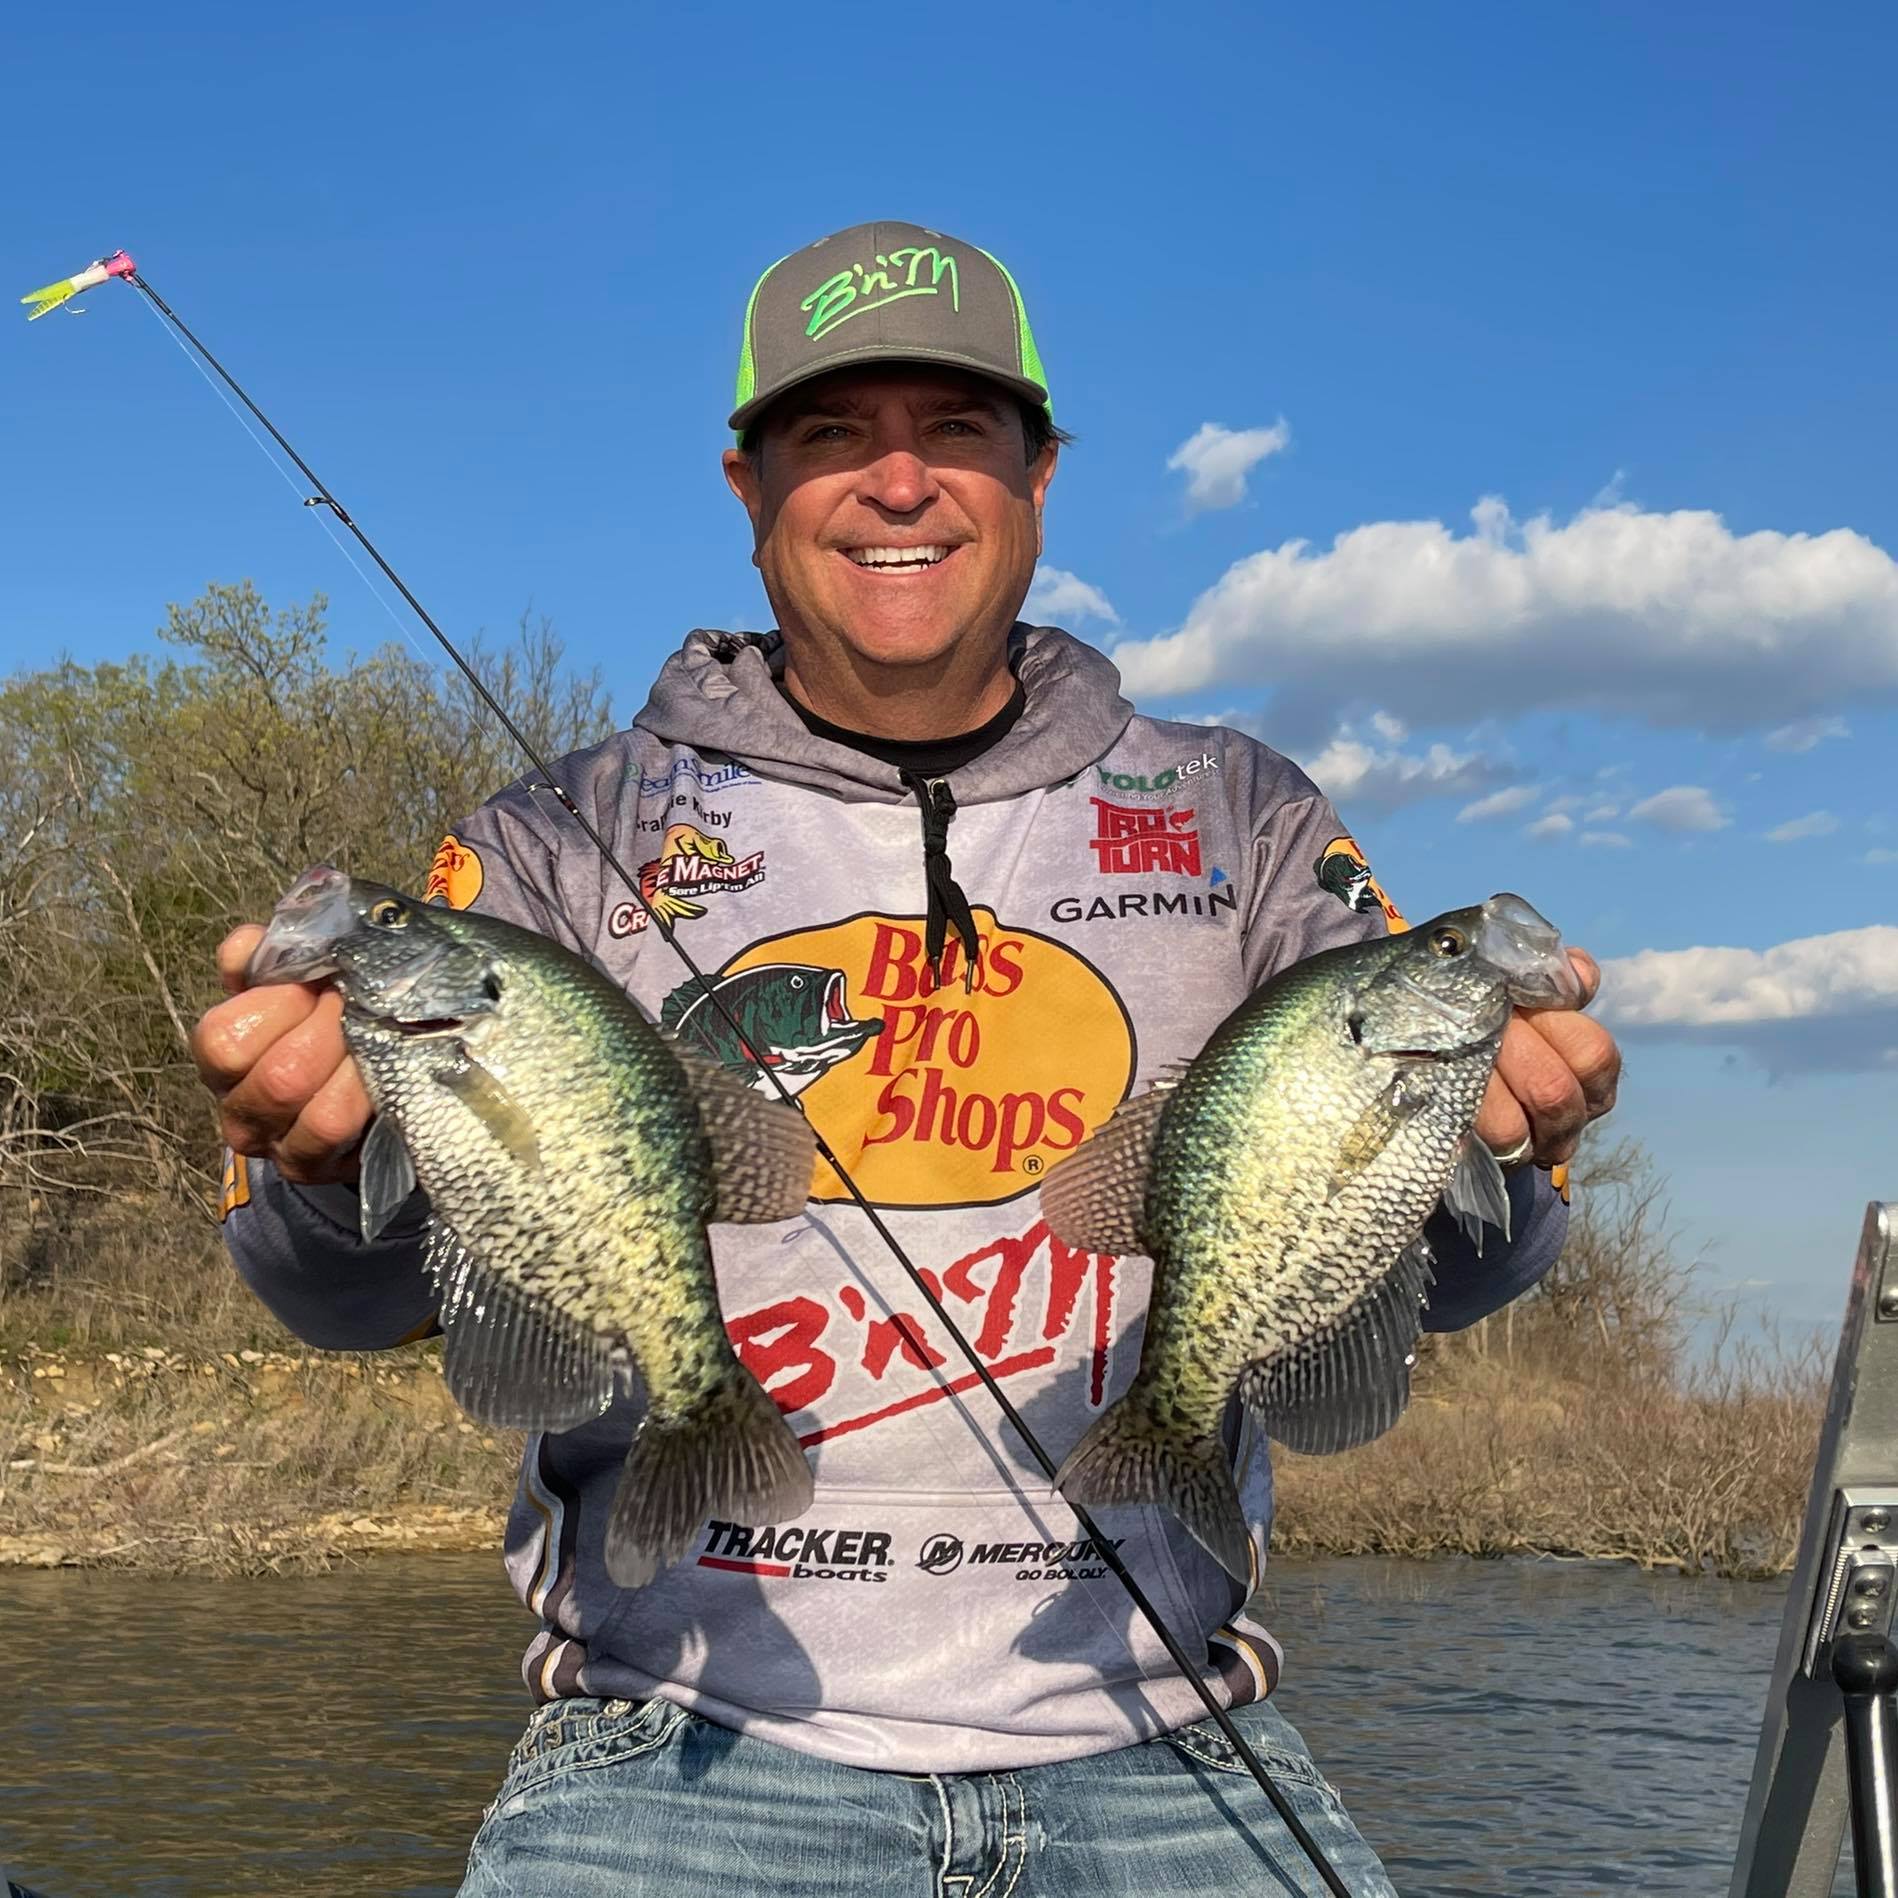 Behind The Scenes of Fish. Eat. Live. with Crappie Kirby